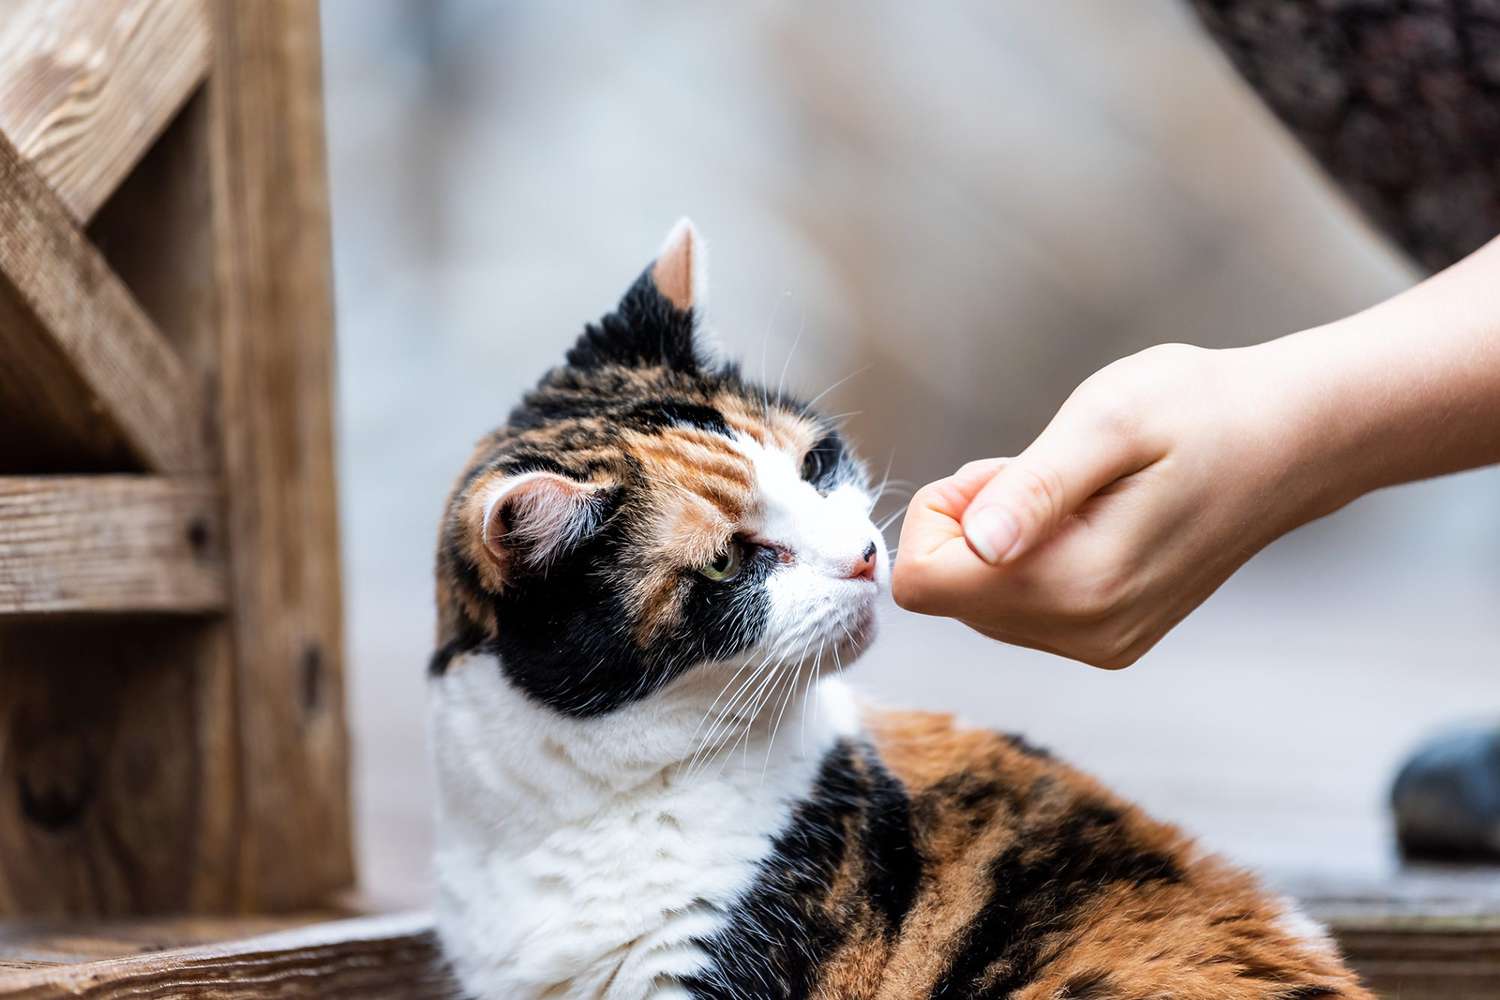 cat sniffing what is in person's fist for &quot;find it&quot; command